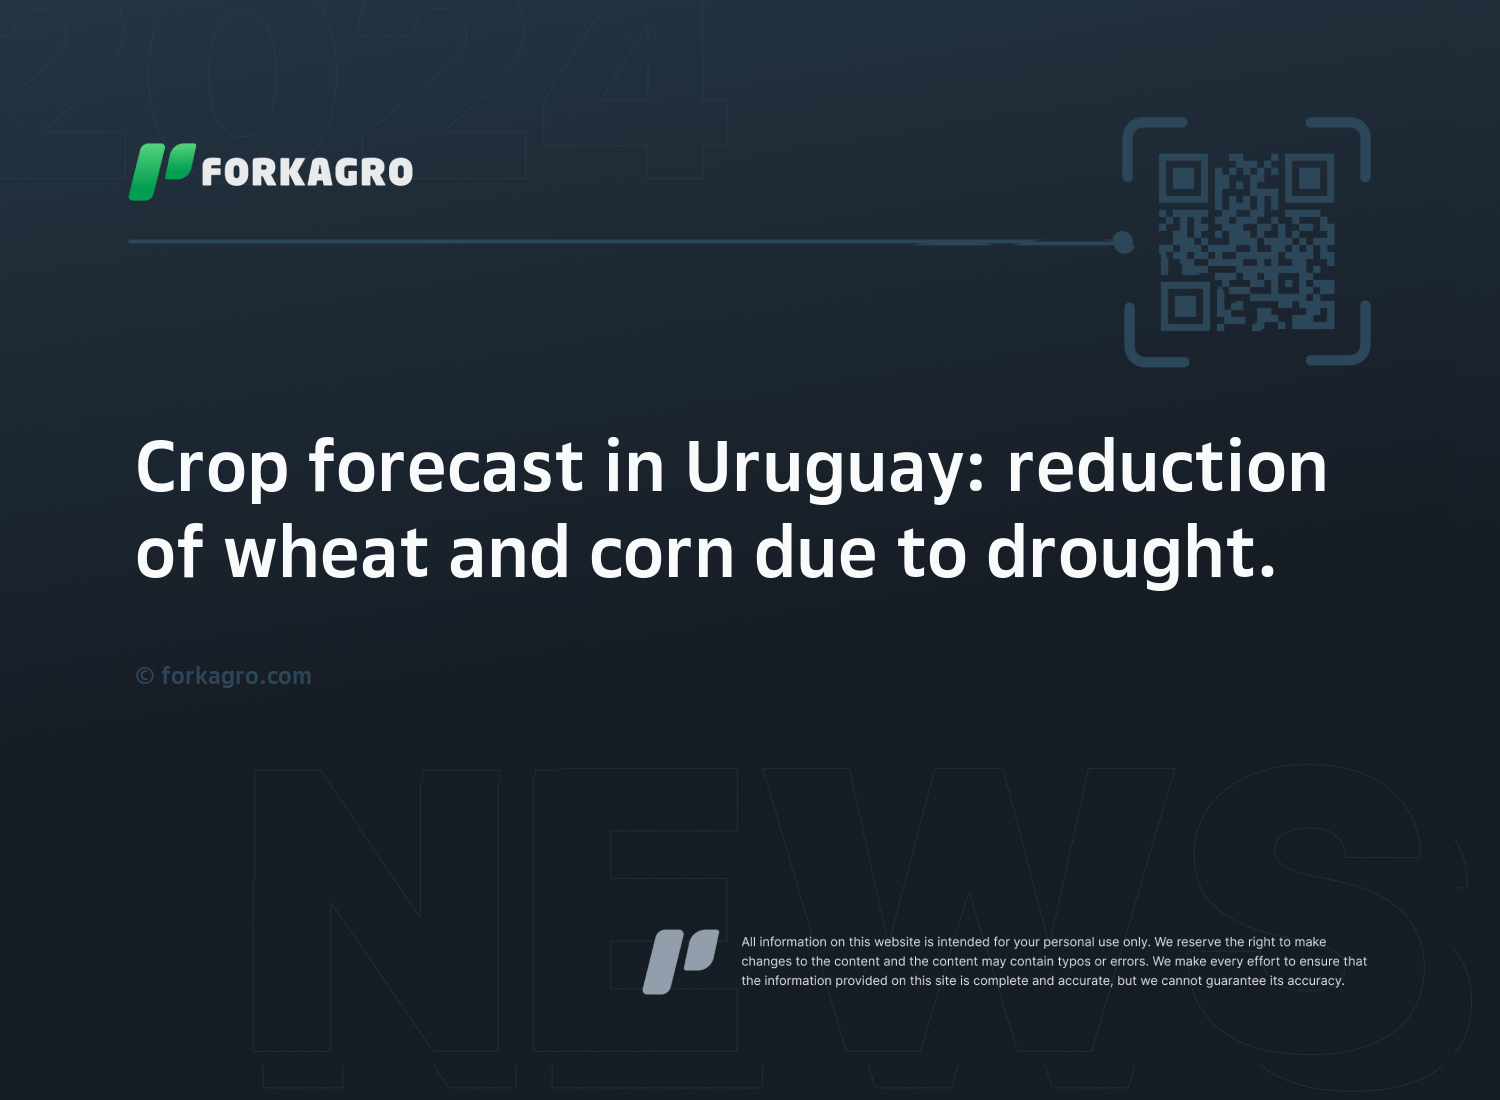 Crop forecast in Uruguay: reduction of wheat and corn due to drought.